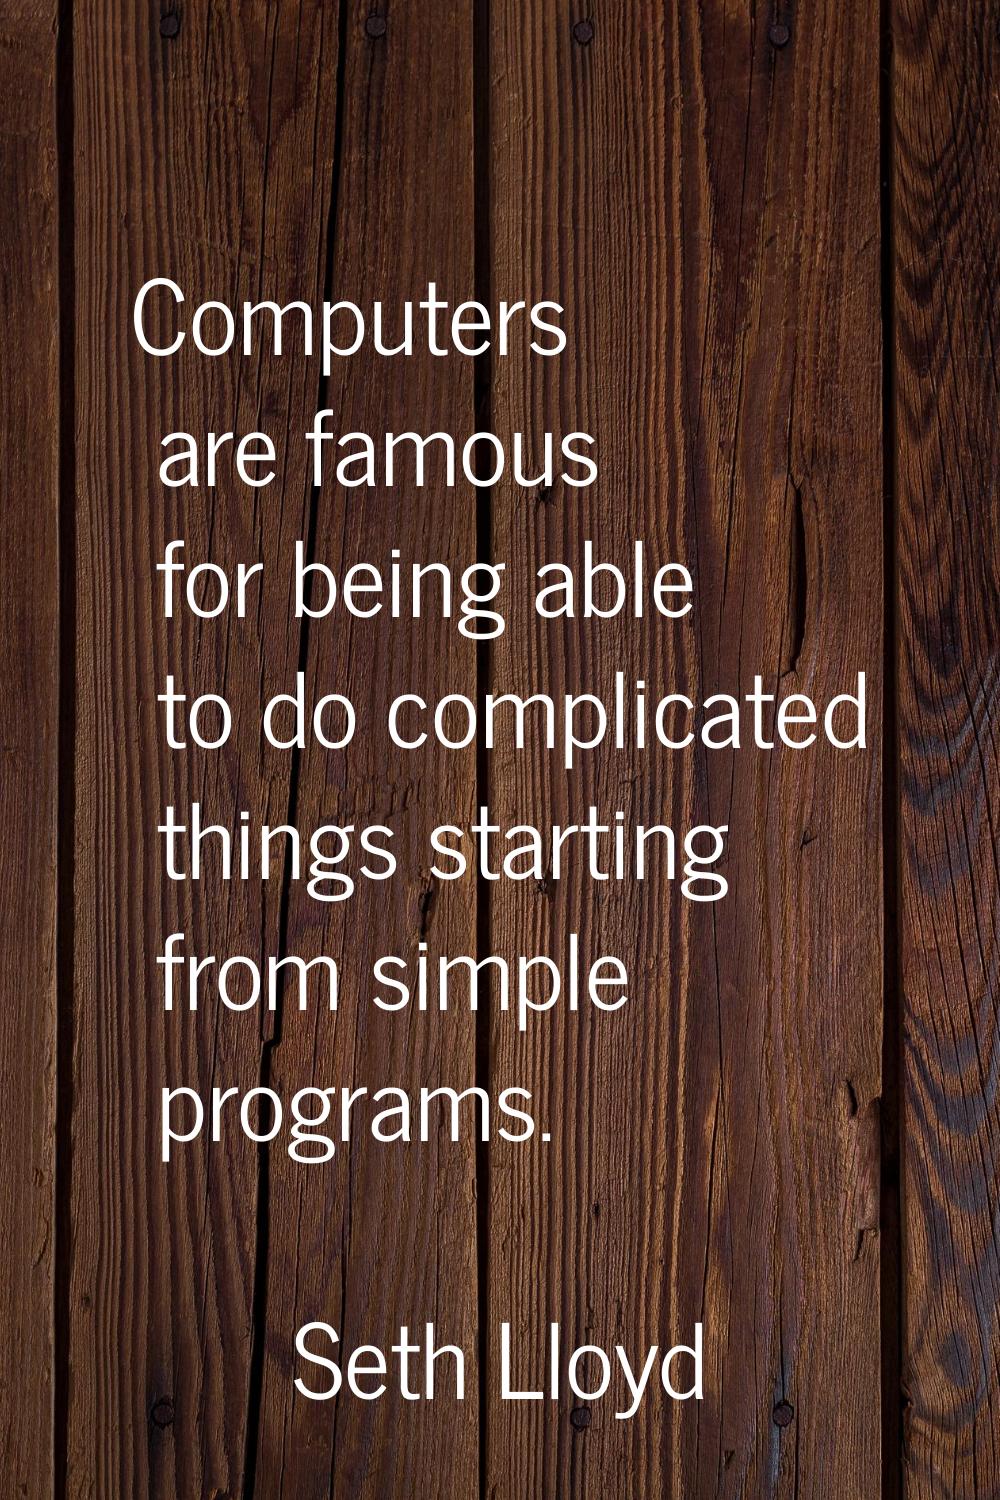 Computers are famous for being able to do complicated things starting from simple programs.